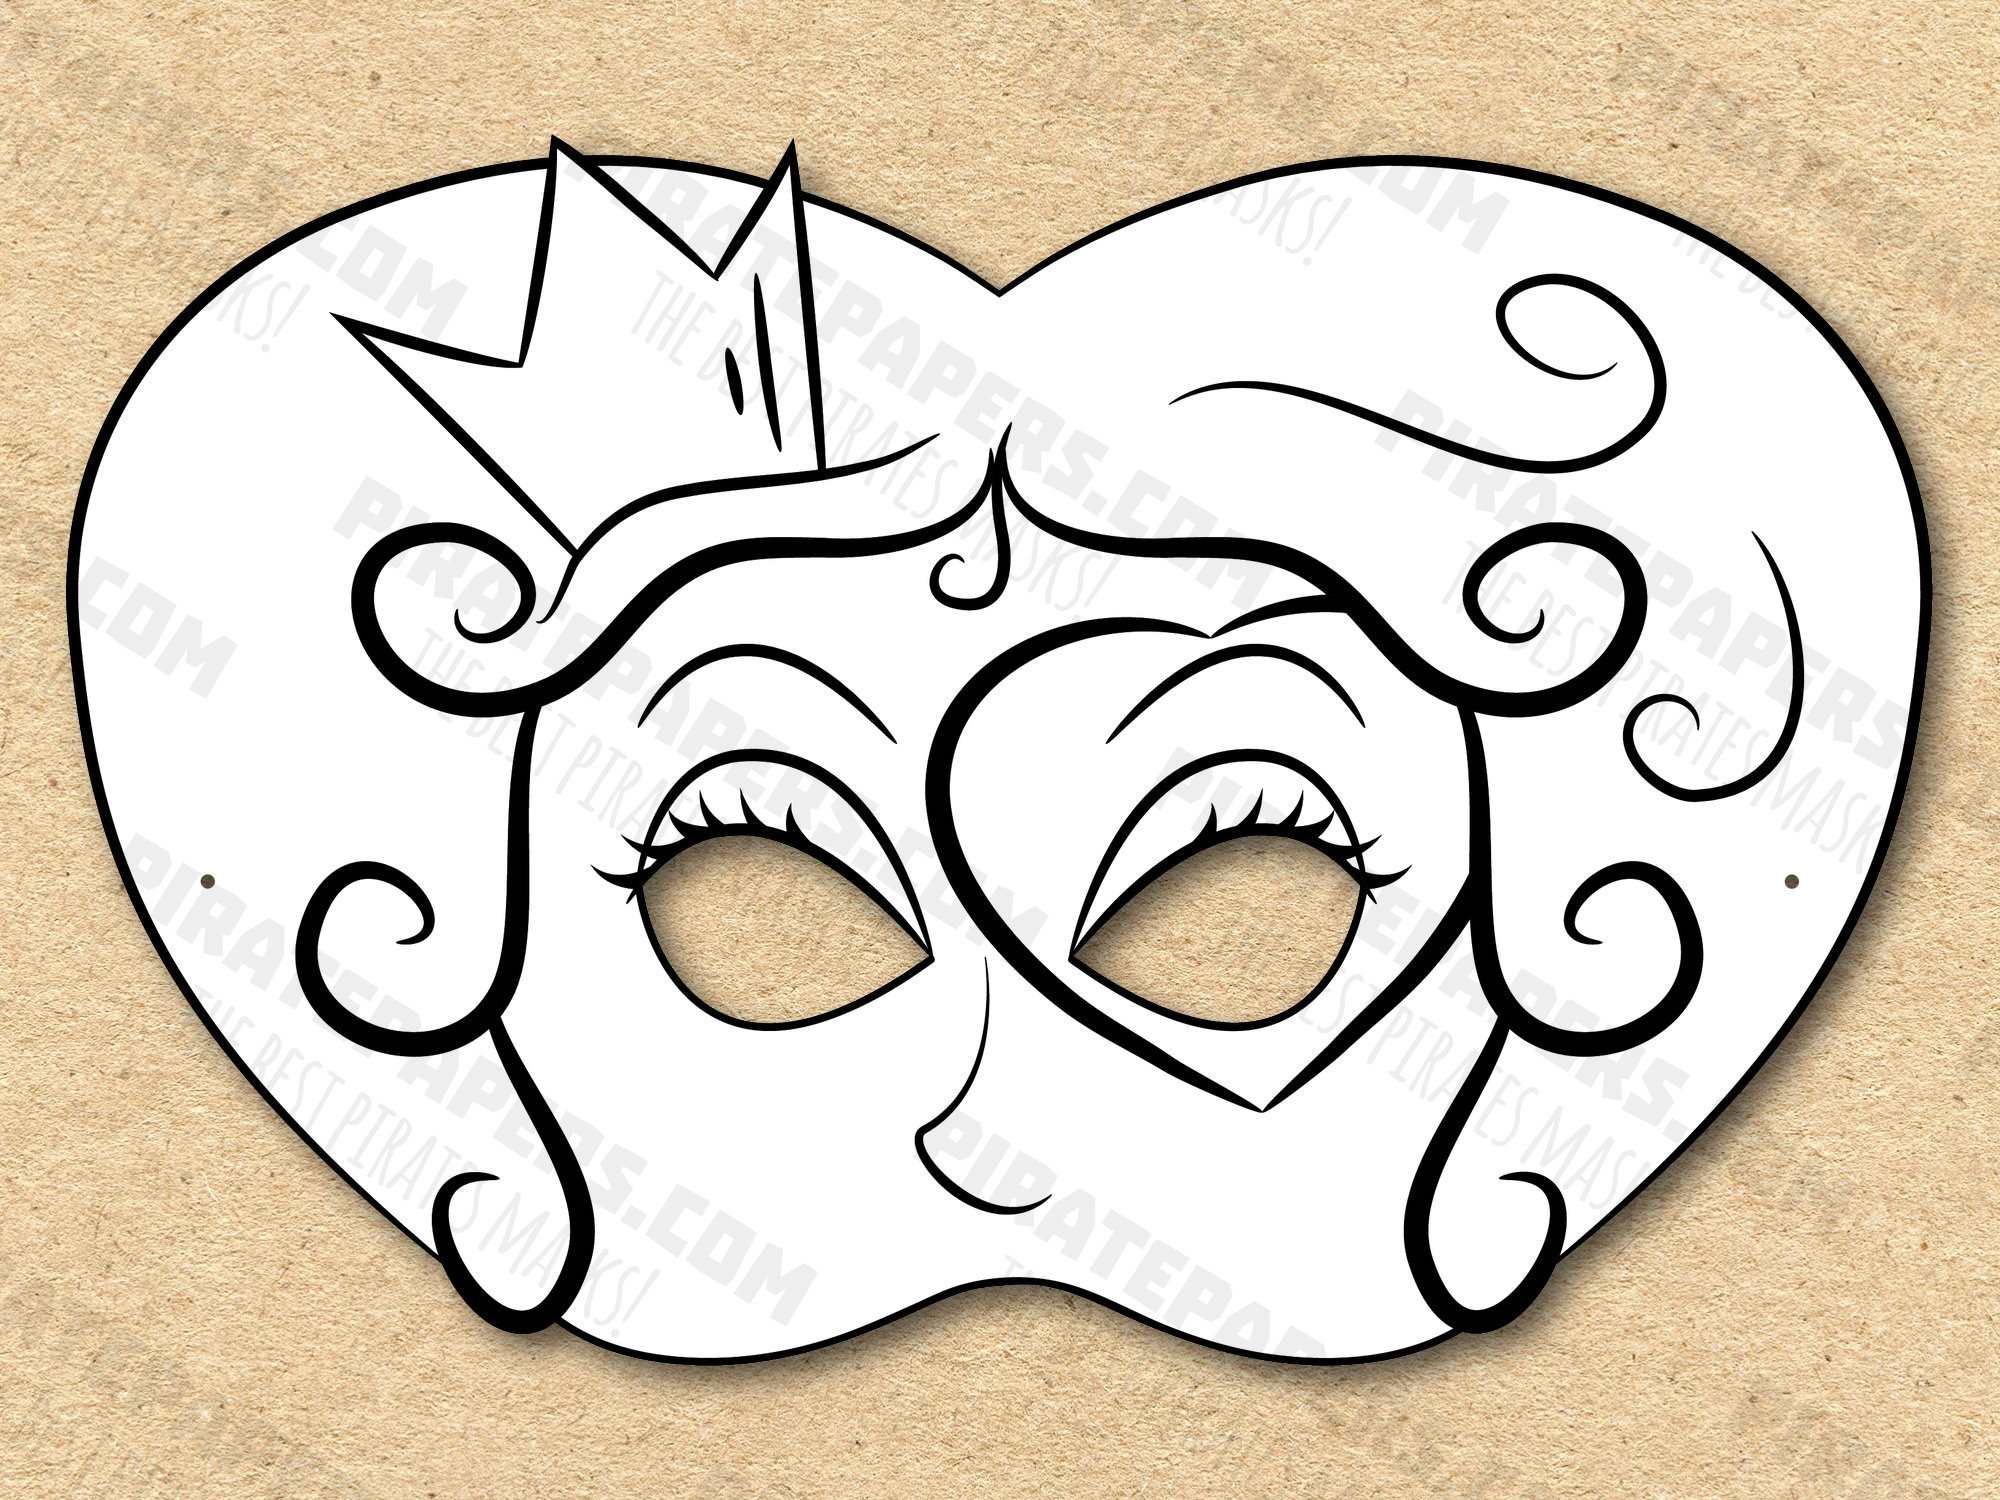 Alice in wonderland masks printable coloring alice white rabbit cheshire cat queen of hearts paper diy kids adults download halloween